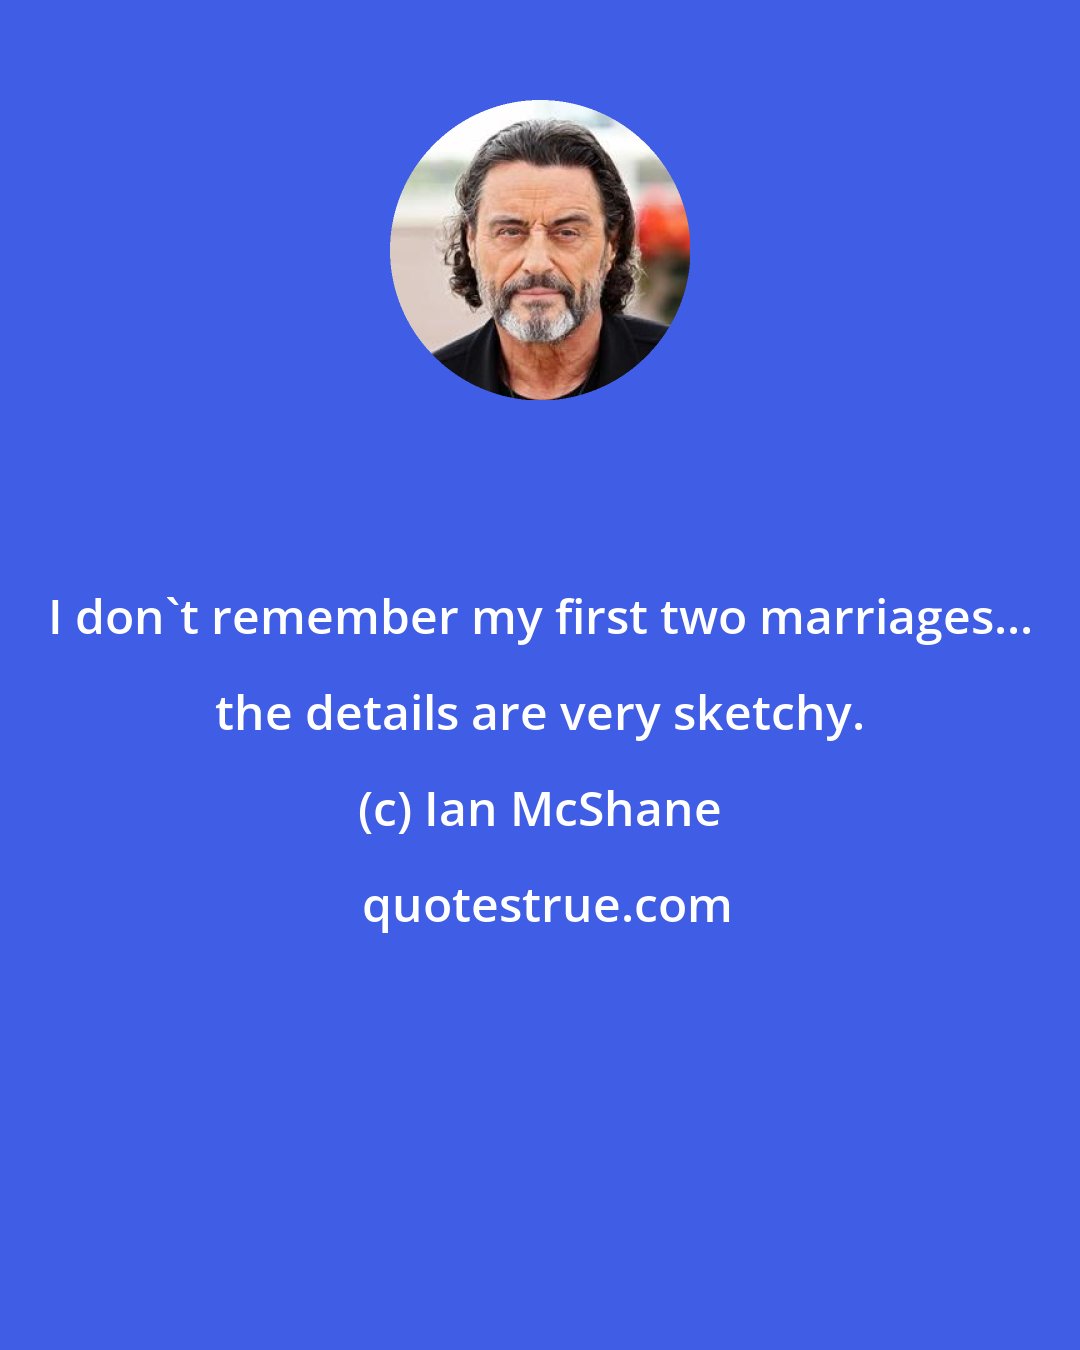 Ian McShane: I don't remember my first two marriages... the details are very sketchy.